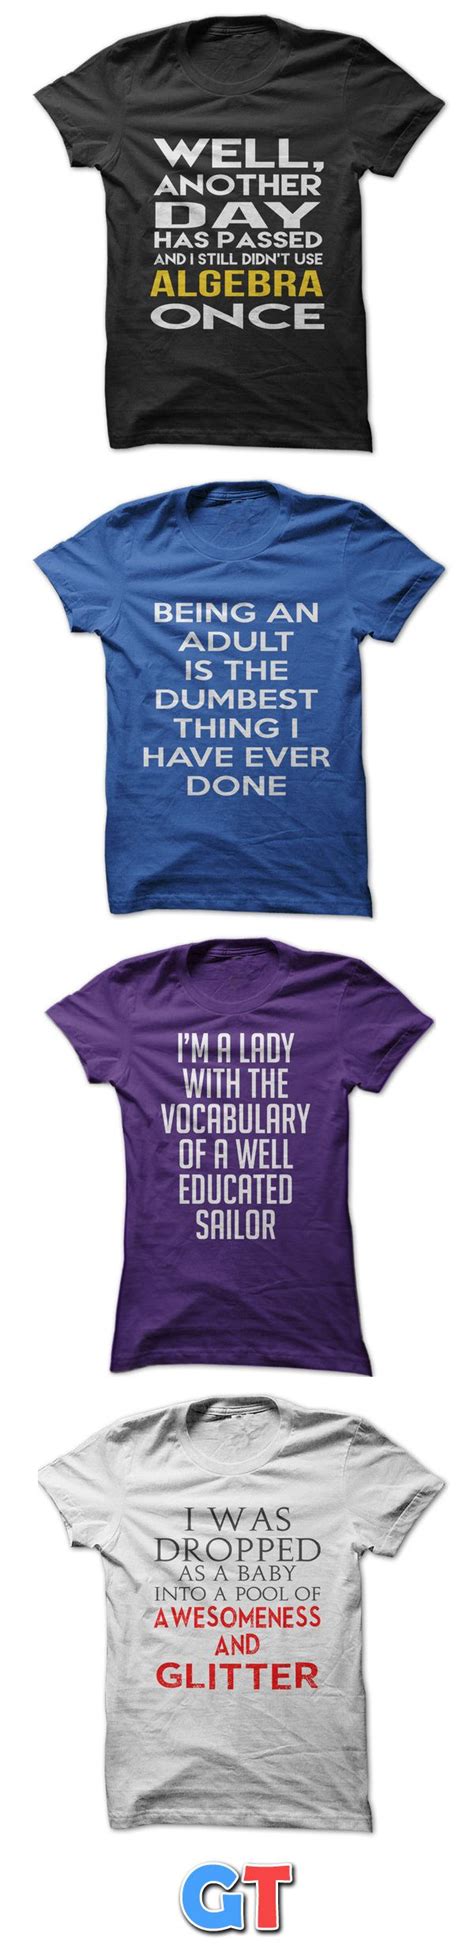 hilarious sayings and clever slogans will get you noticed when you wear our shirts super